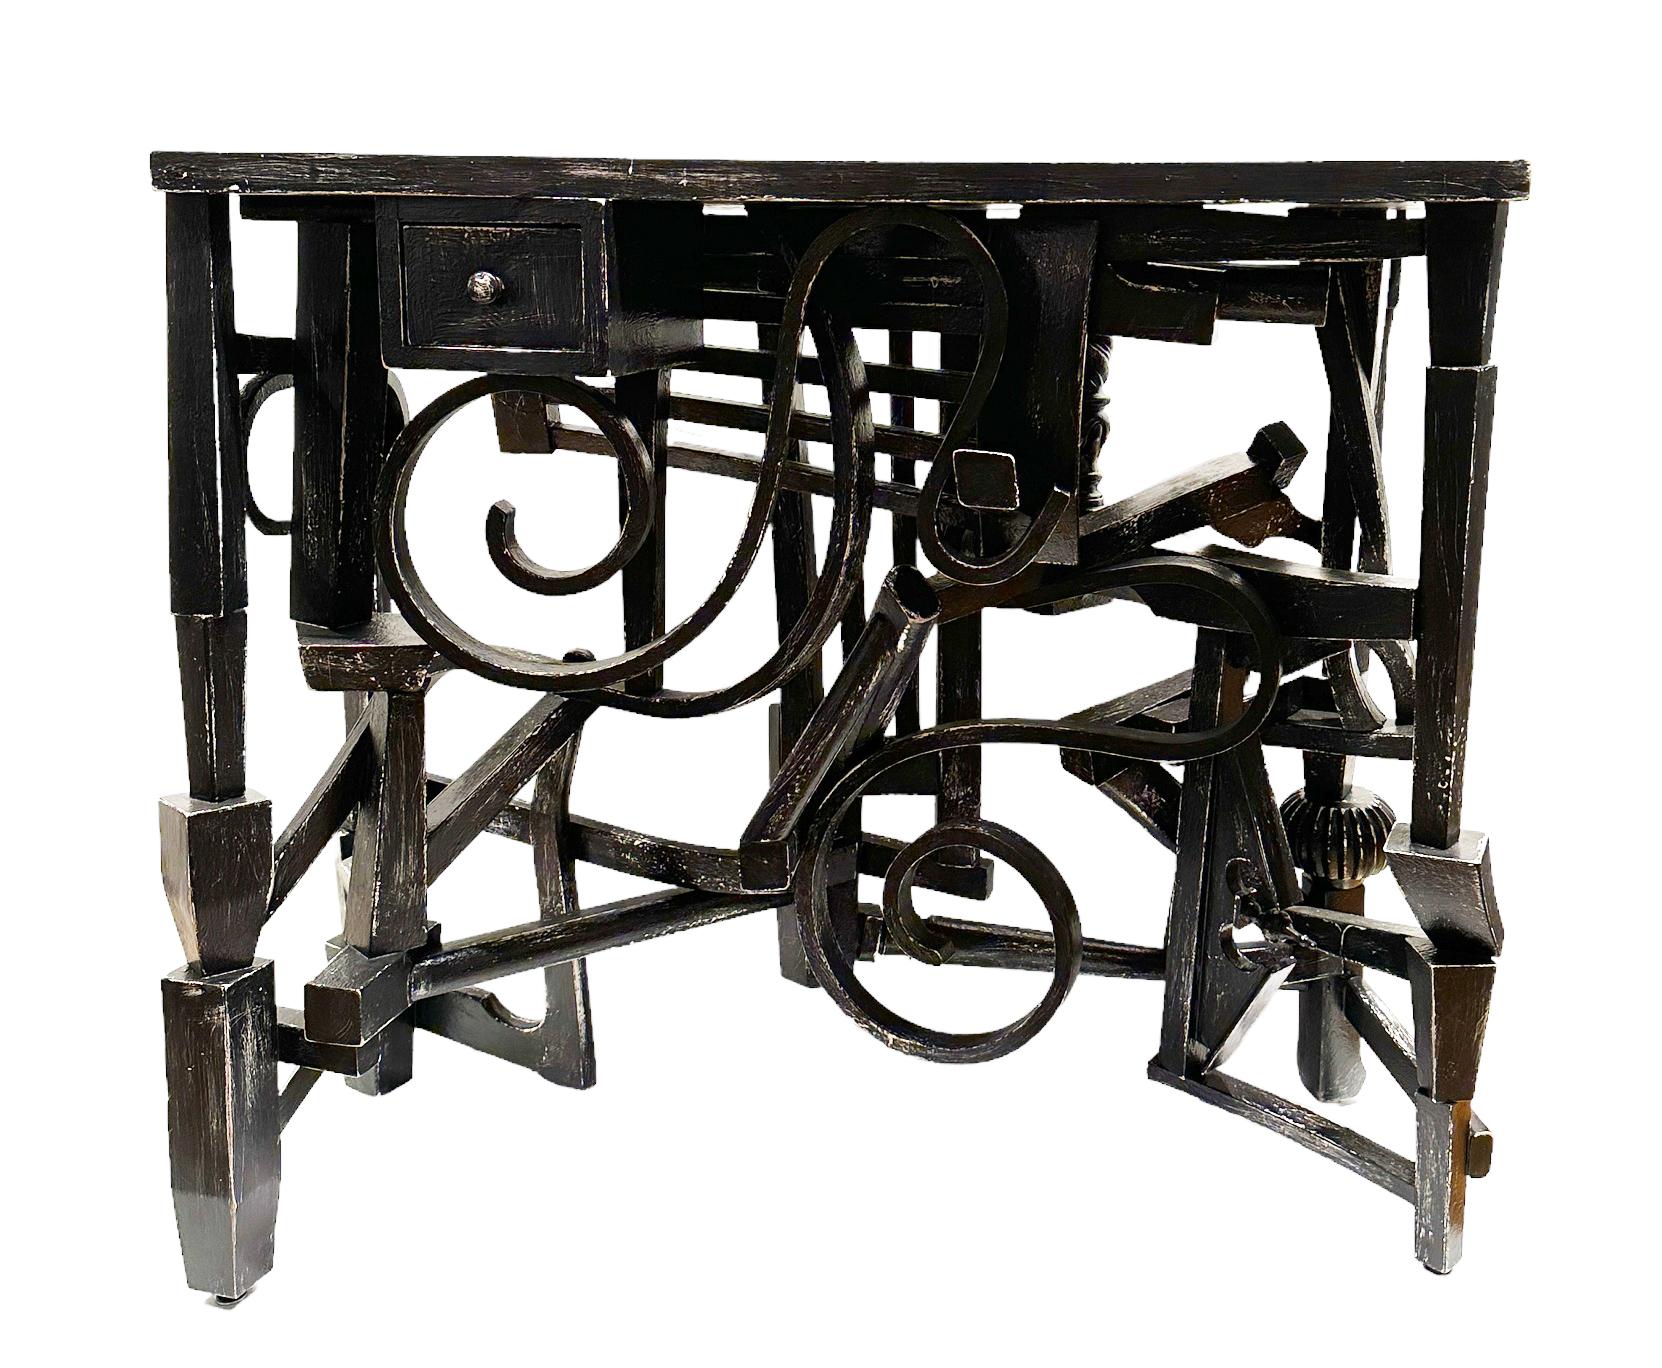 Contemporary Black Console/Entry Table with Drawer, Distressed, Found Wooden Spindles